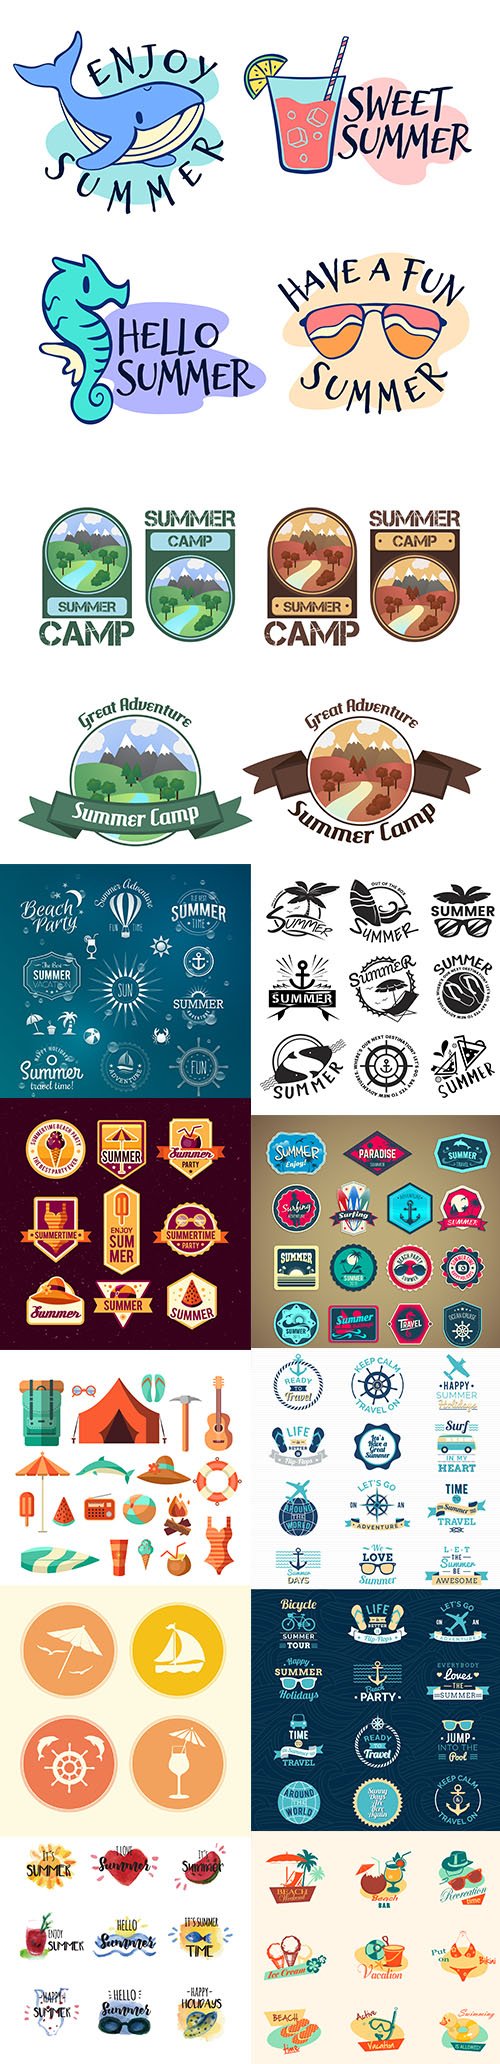 Hand-drawn summer badge collection